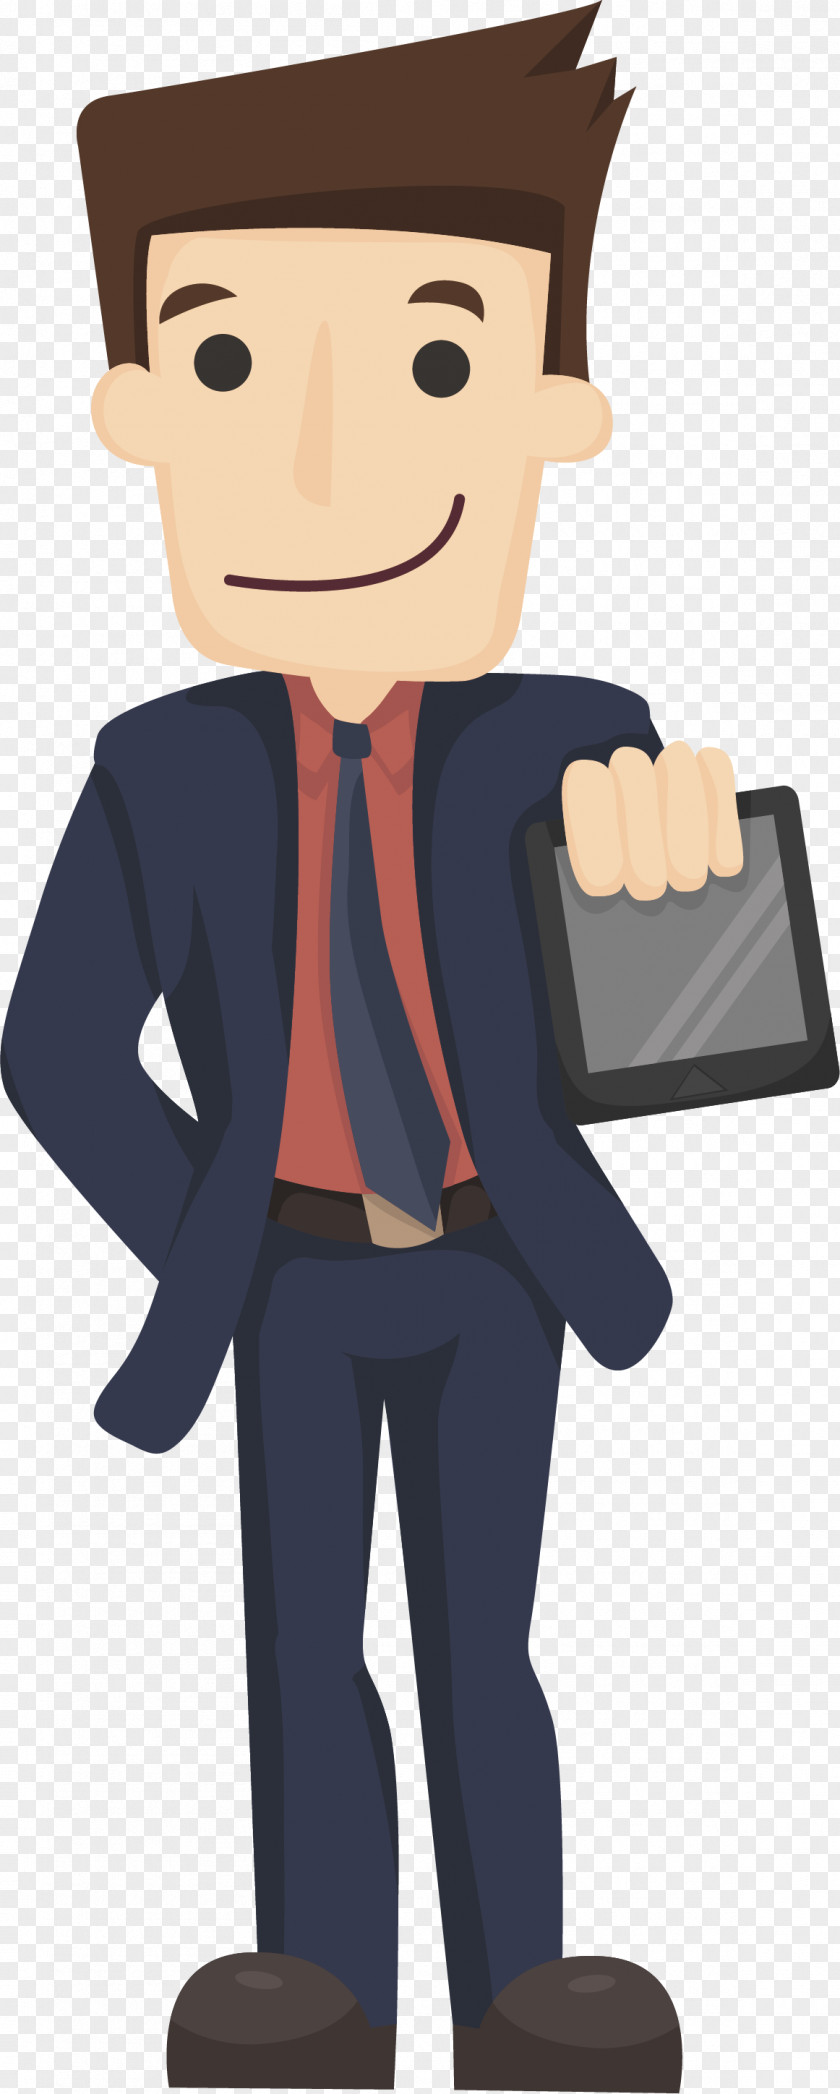 Someone Who Is Using A Cell Phone Businessperson Cartoon Illustration PNG